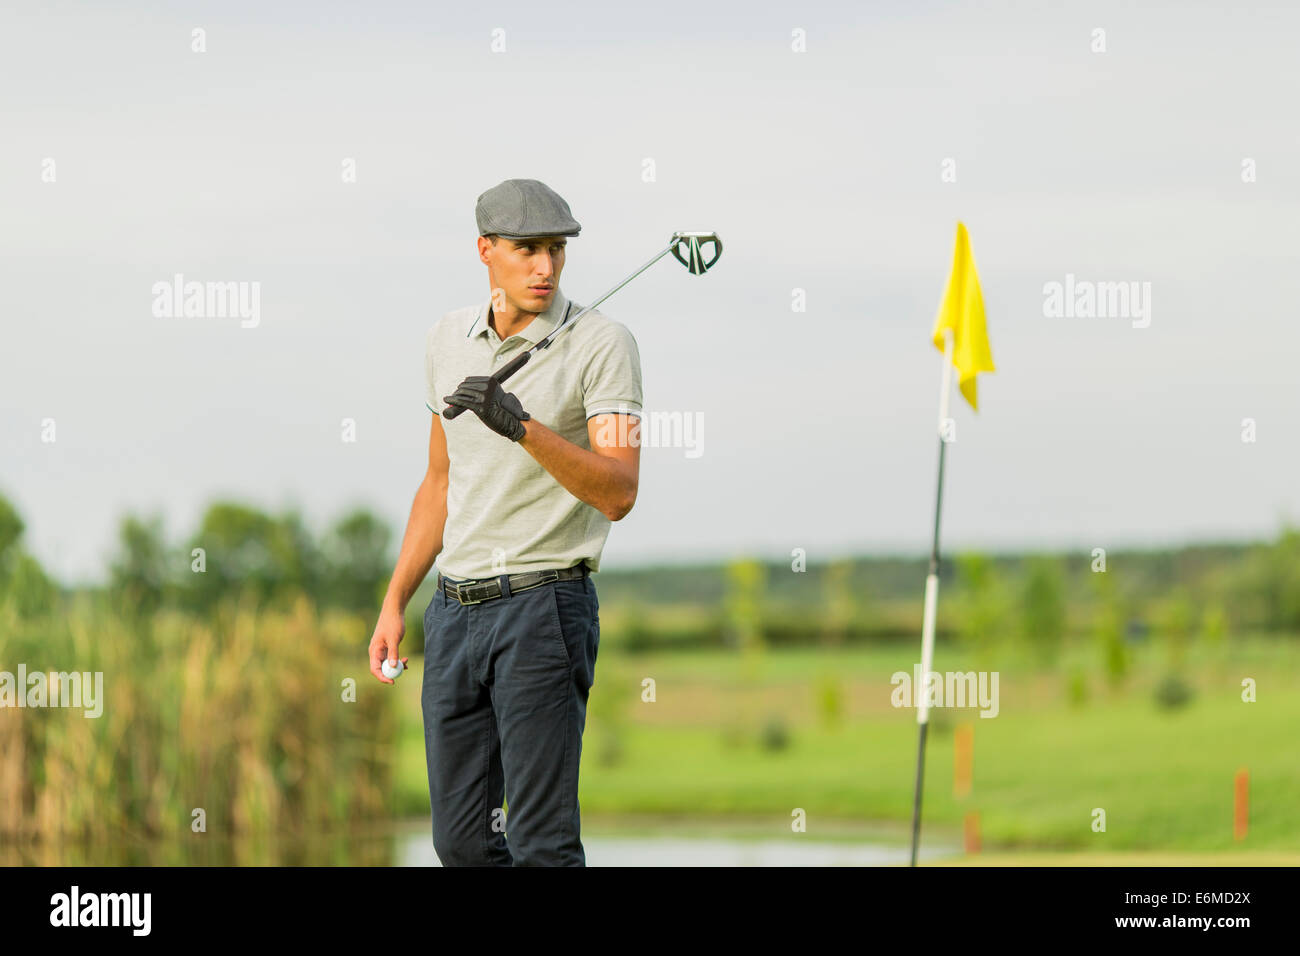 Young man playing golf Banque D'Images